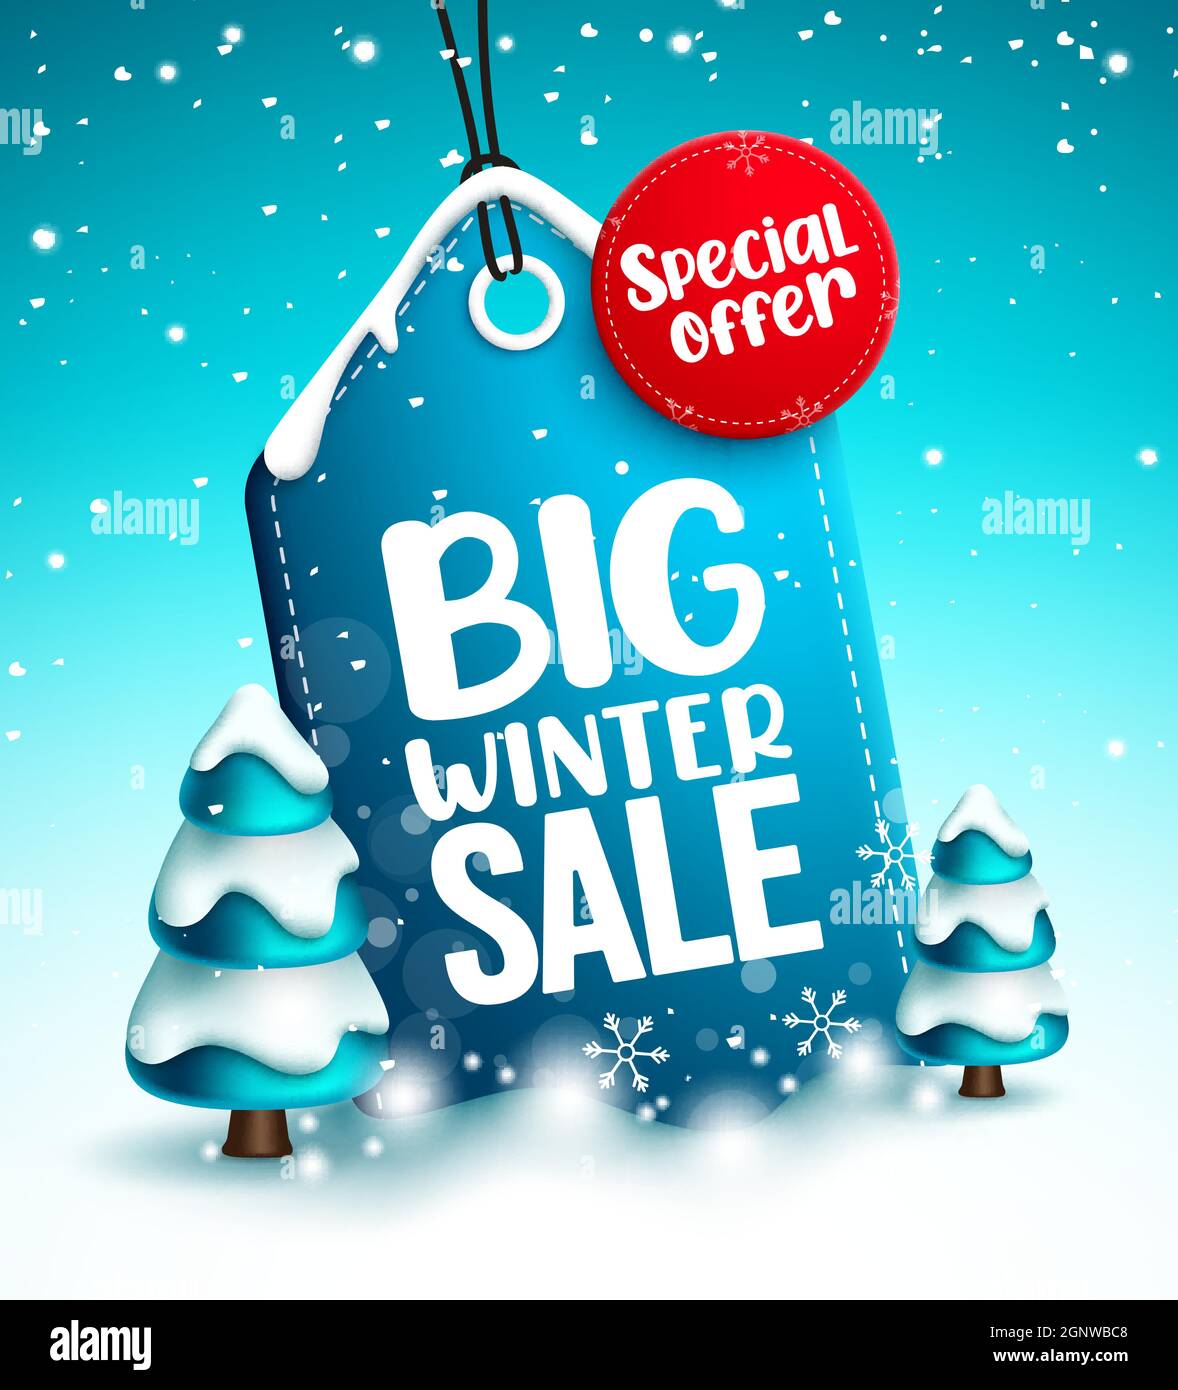 Winter sale tag vector design. Winter big sale special offer text in discount label element in snow background for seasonal shopping promotion. Stock Vector